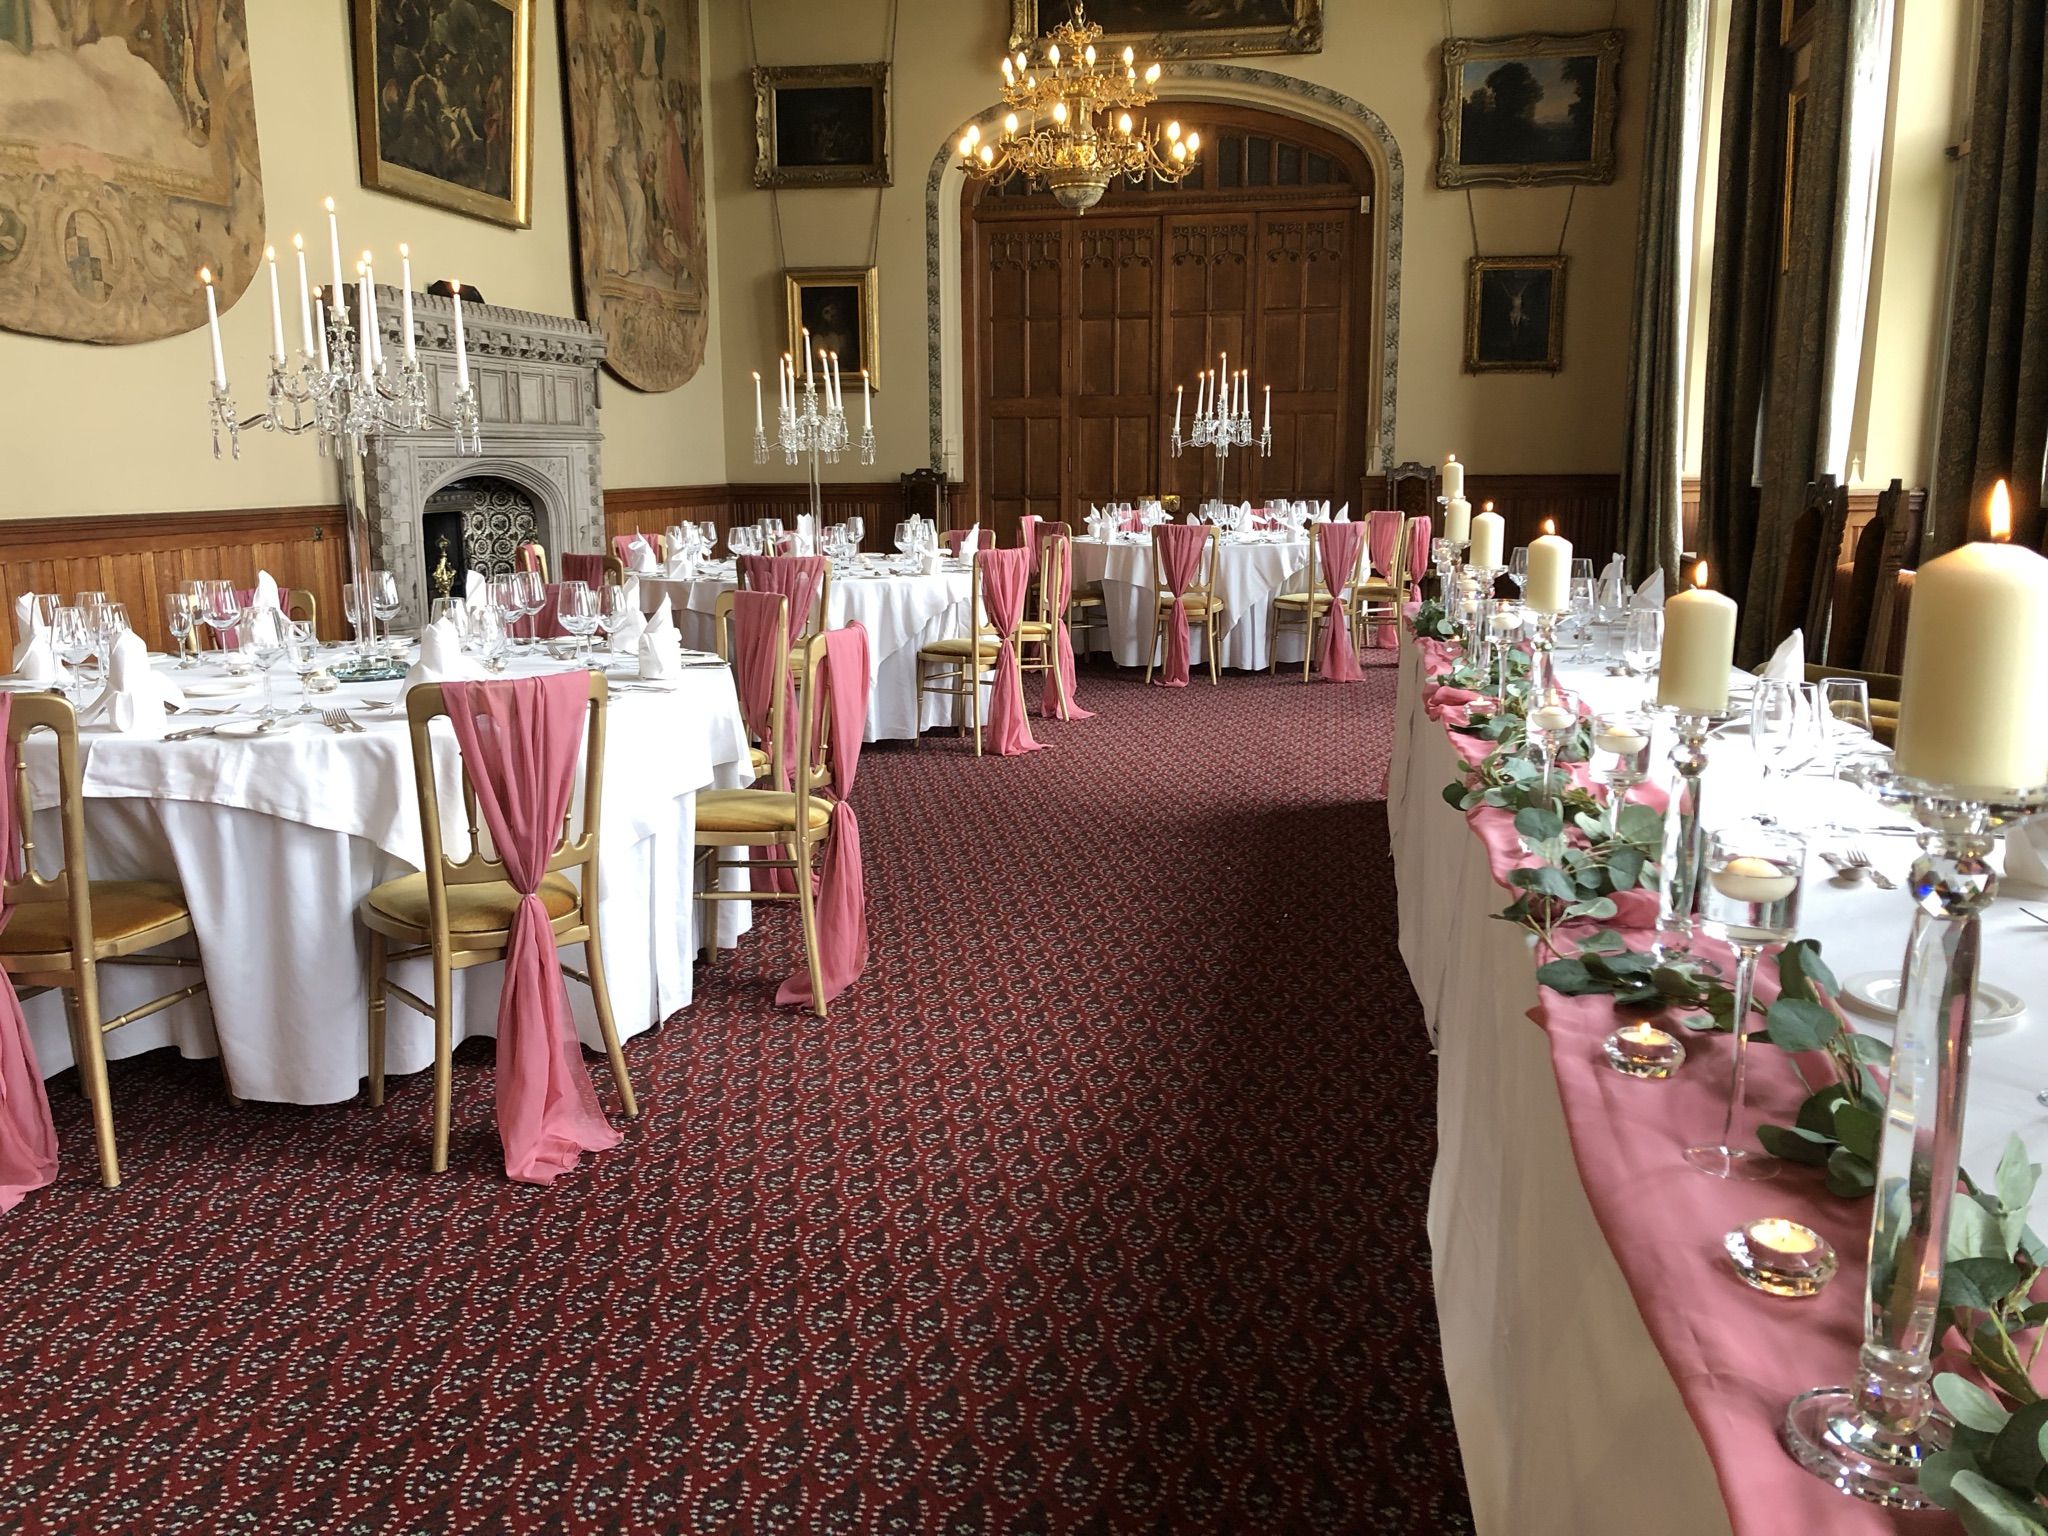 a banquet hall with tables and chairs covered in pink and white linens.